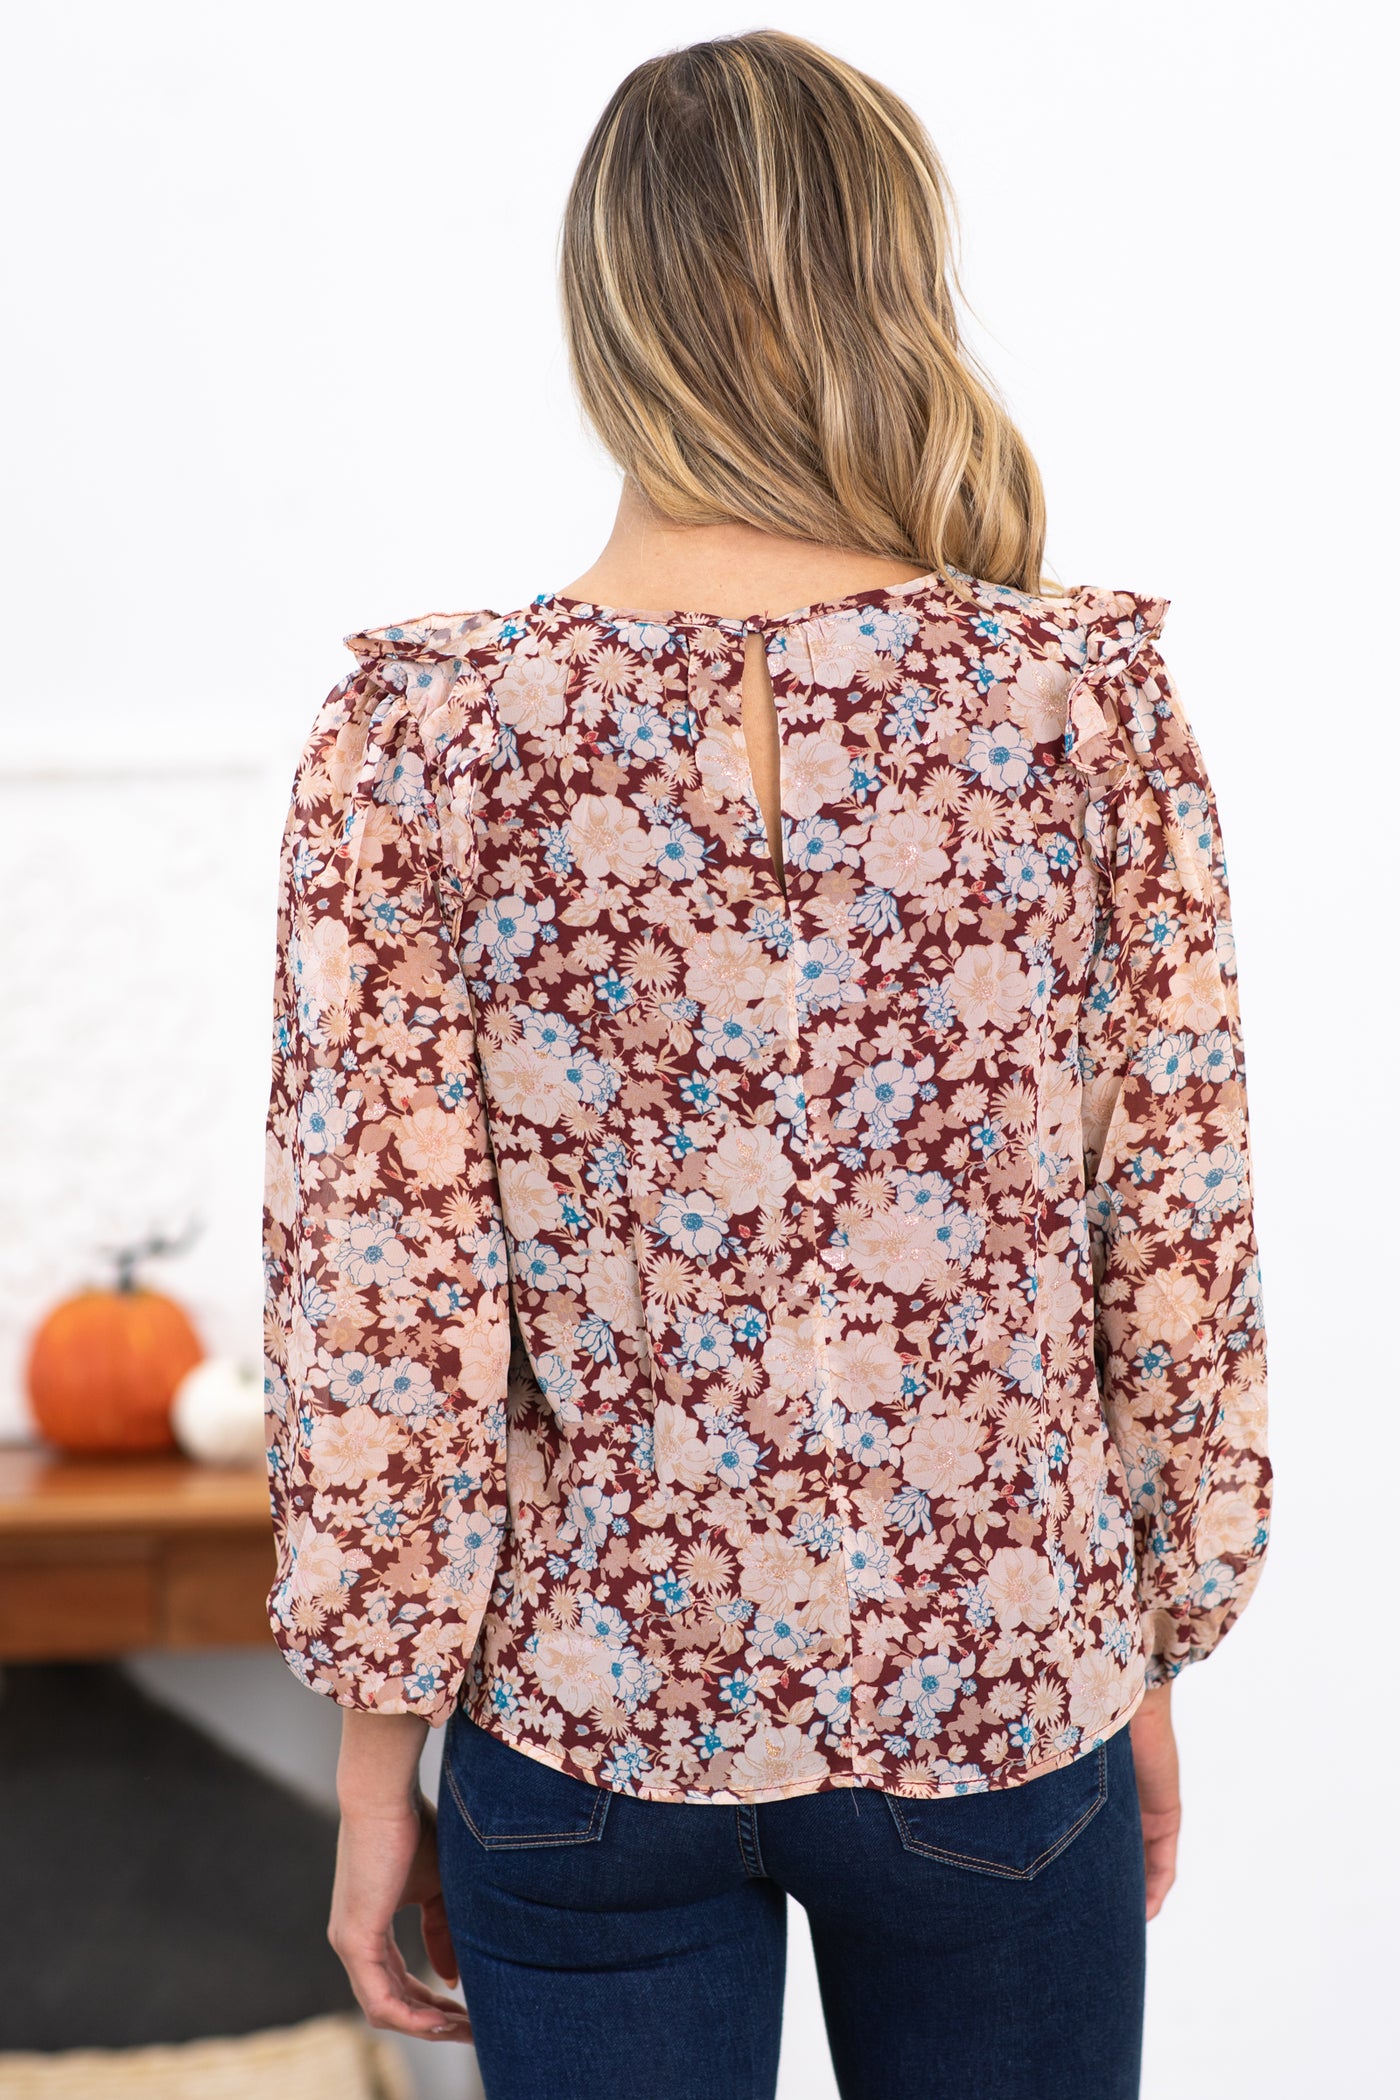 Wine and Tan Floral Top With Ruffle Trim